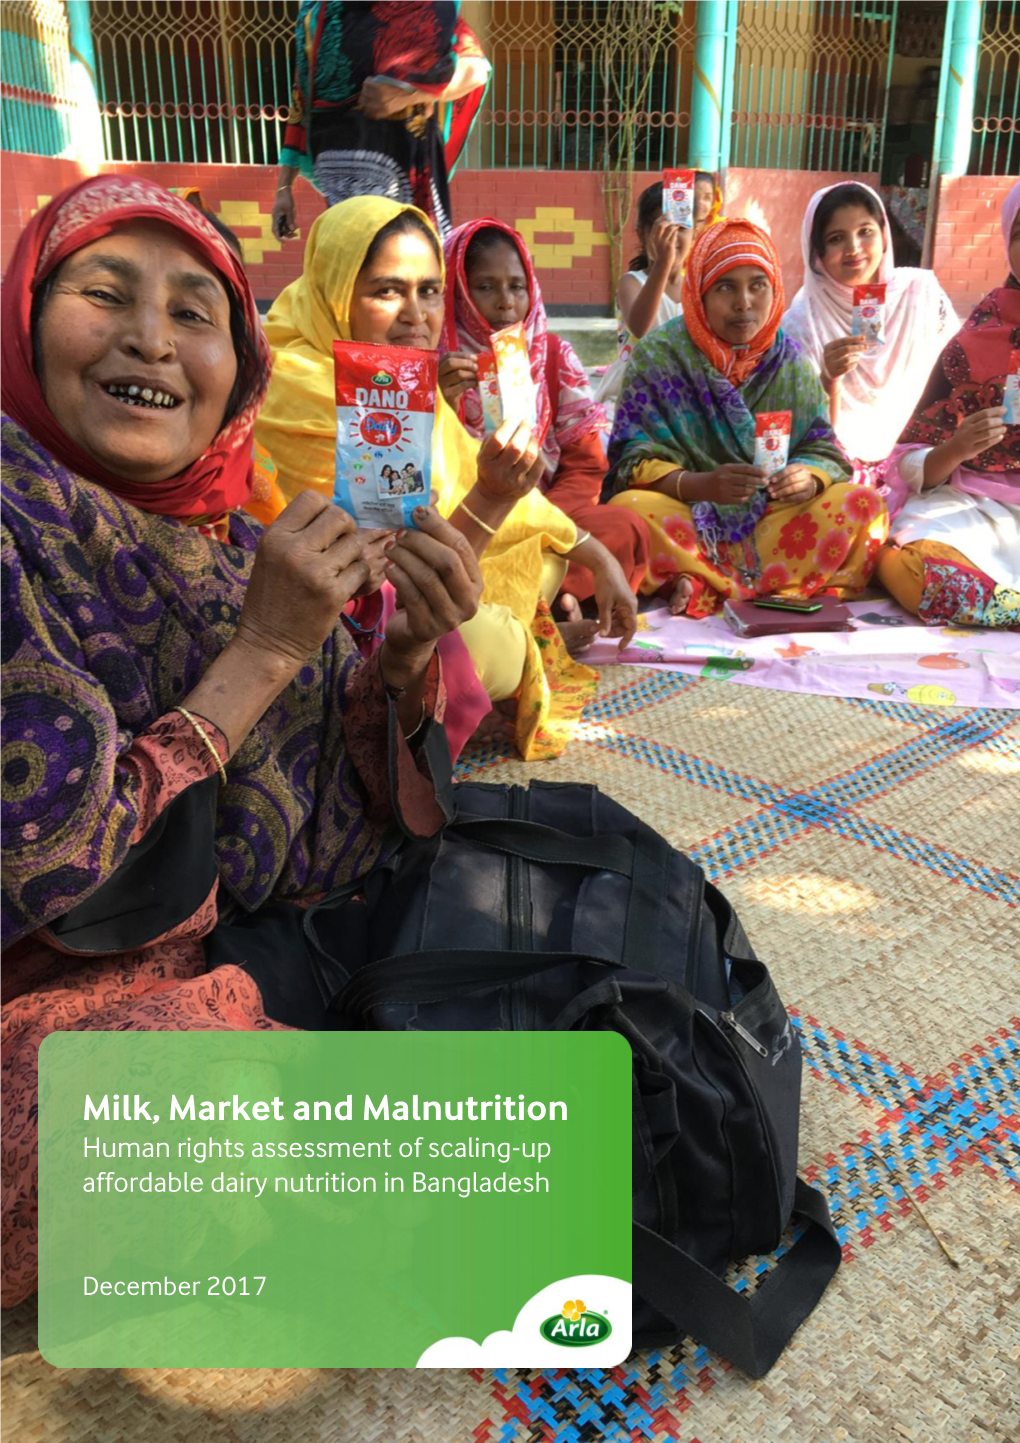 Milk, Market and Malnutrition Human Rights Assessment of Scaling-Up Affordable Dairy Nutrition in Bangladesh